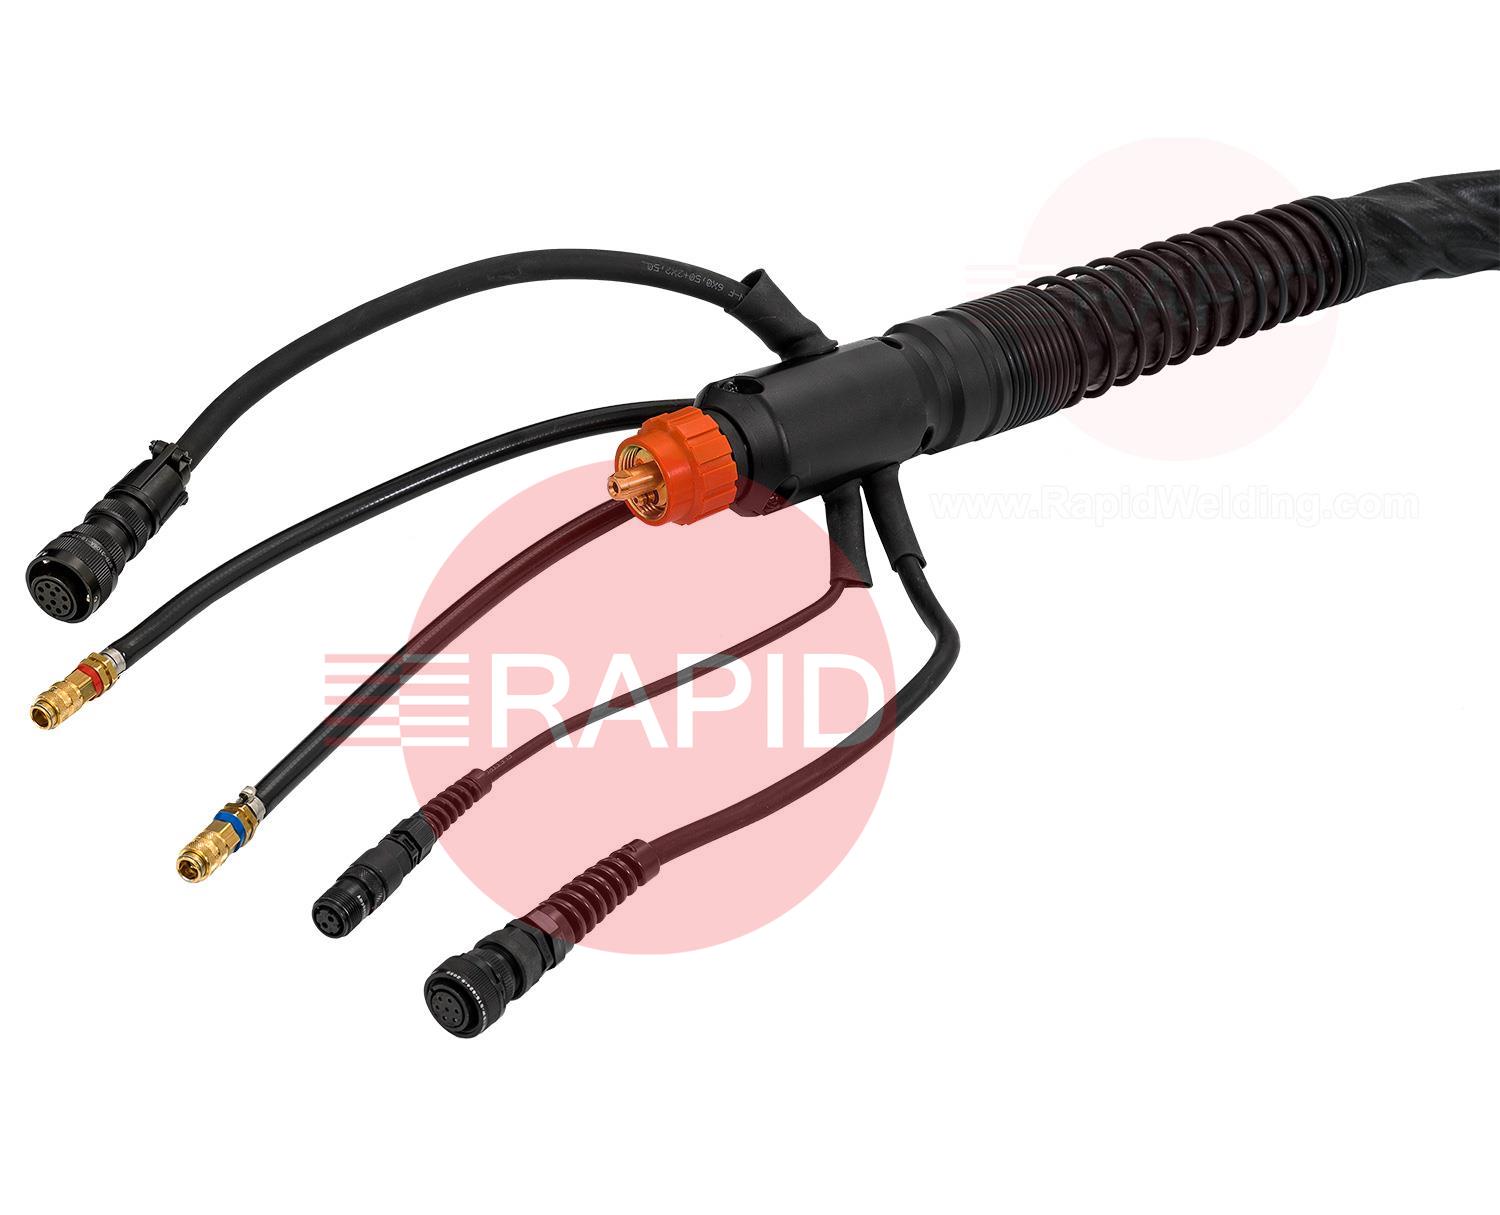 SGTXW105CBL  Kemppi Supersnake GTX Water Cooled Interconnection Cable (Std Liner FE 1.0-1.6mm) - 10m / 50mm2